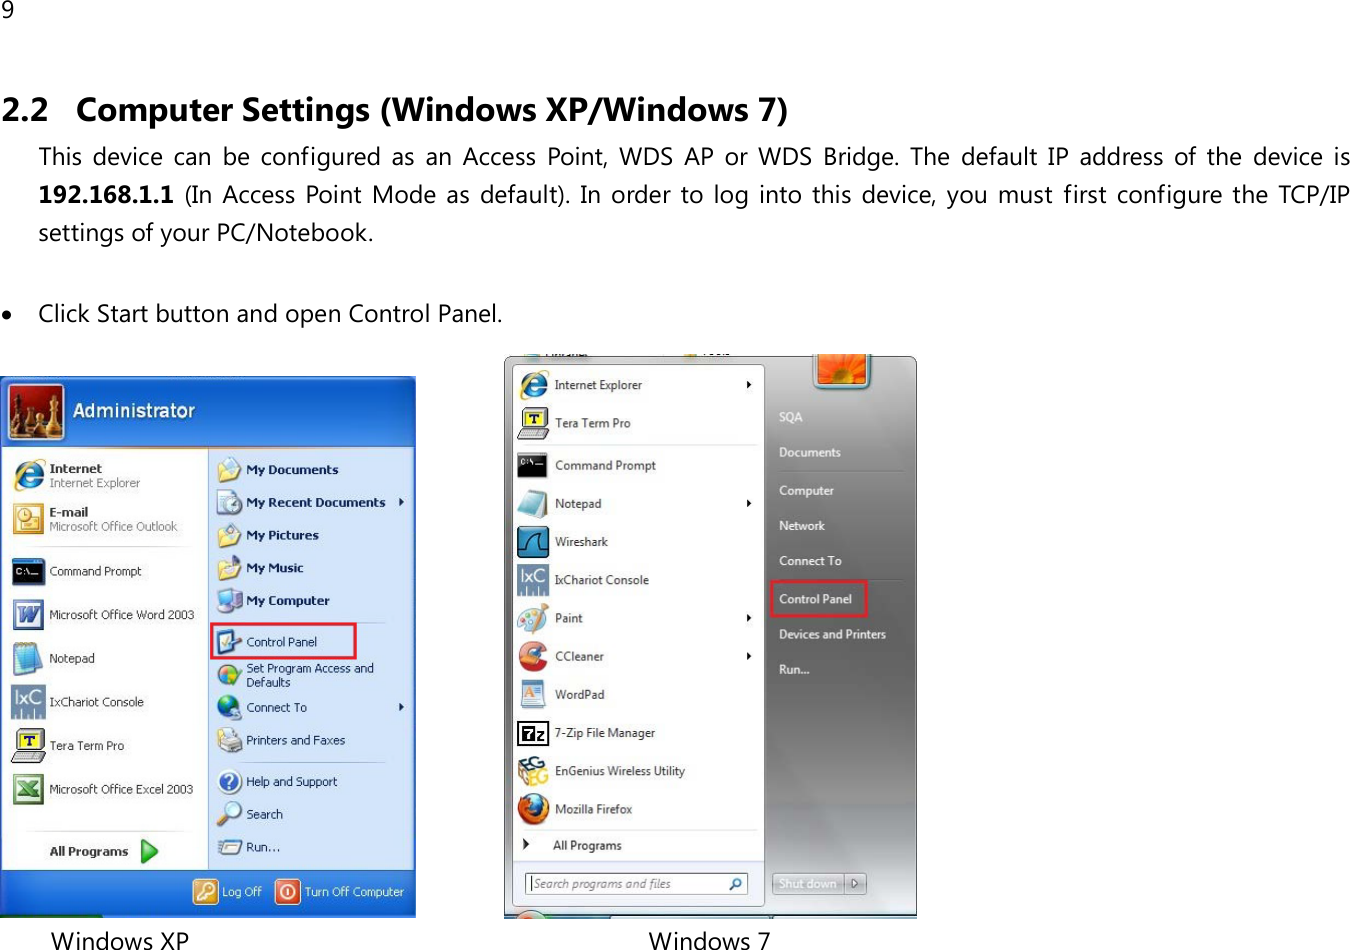 9  2.2 Computer Settings (Windows XP/Windows 7) This device can be configured as an  Access Point, WDS AP or  WDS Bridge. The default IP address of the device is 192.168.1.1 (In  Access Point Mode as default). In order to log into this device, you must first configure the TCP/IP settings of your PC/Notebook.  • Click Start button and open Control Panel.                   Windows XP                                                                   Windows 7